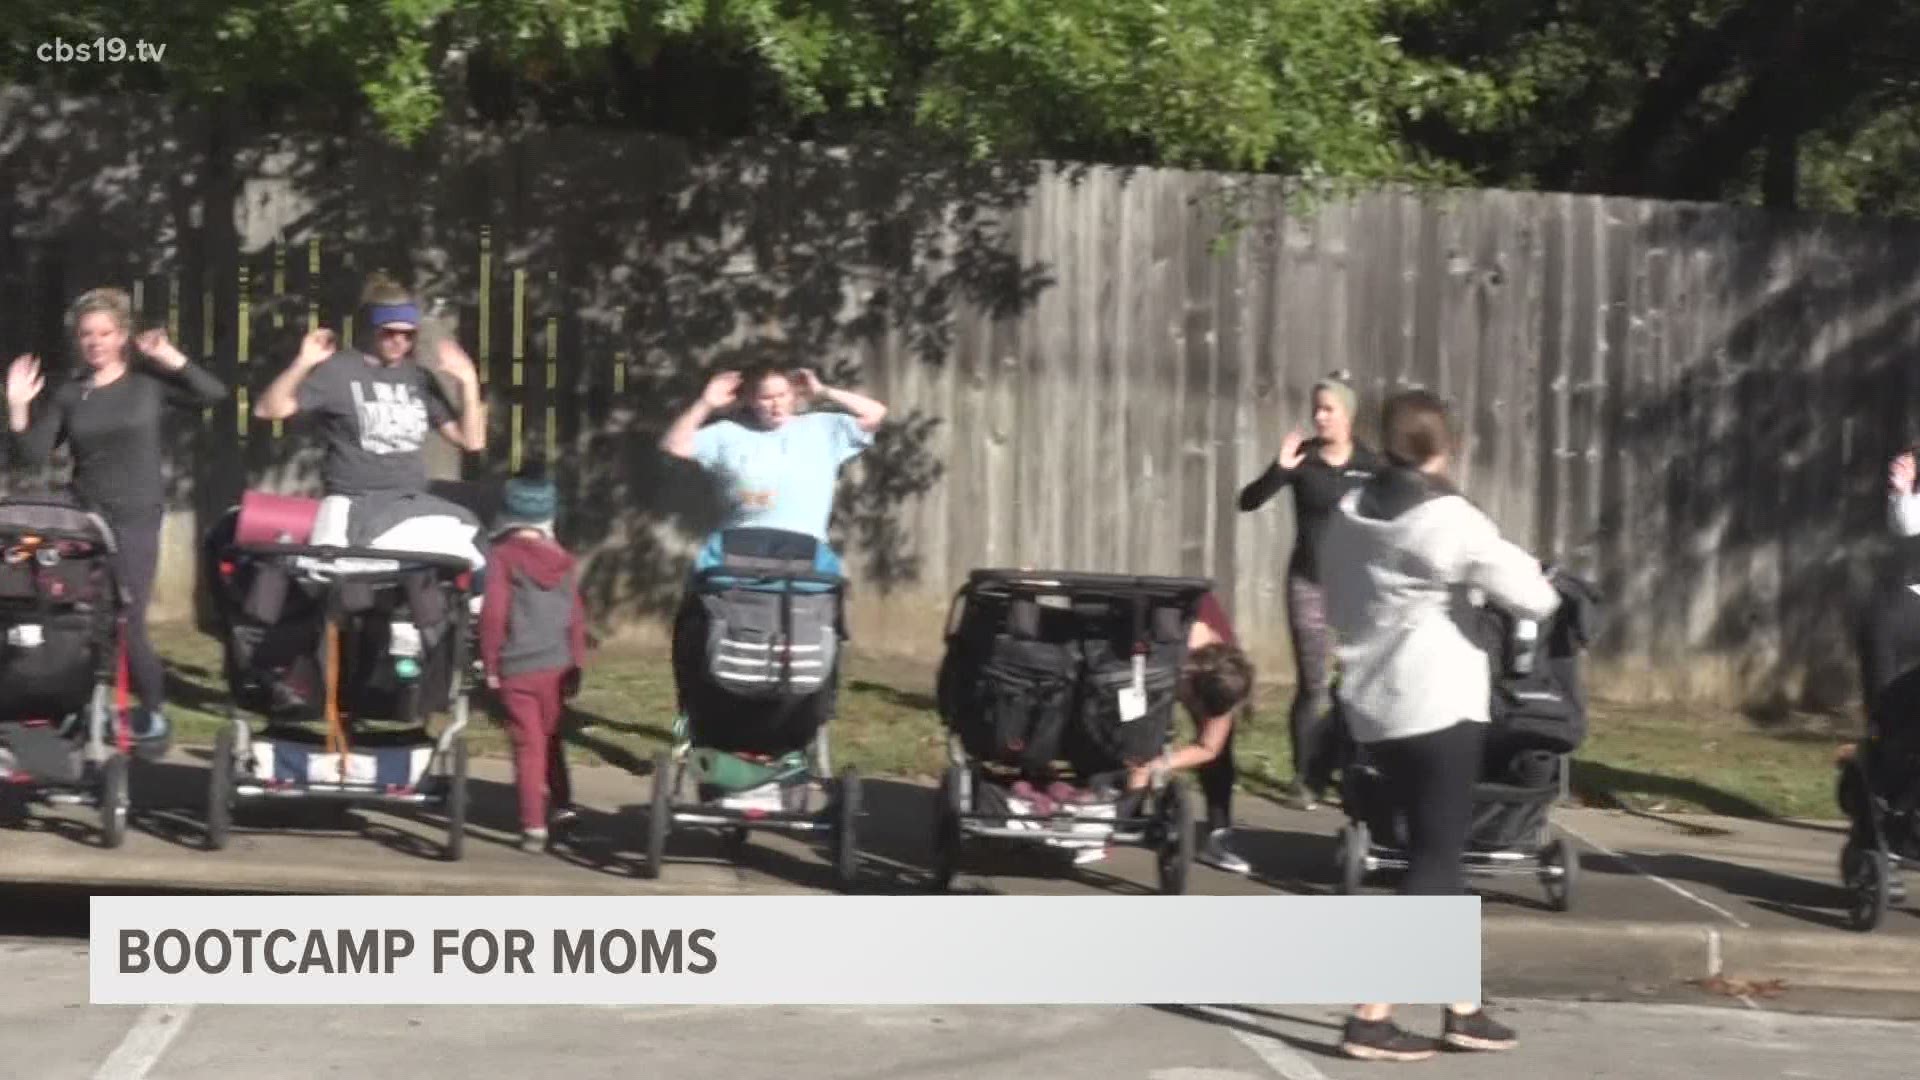 No babysitter, no problem. A Tyler based boot camp is perfect for moms with little ones.